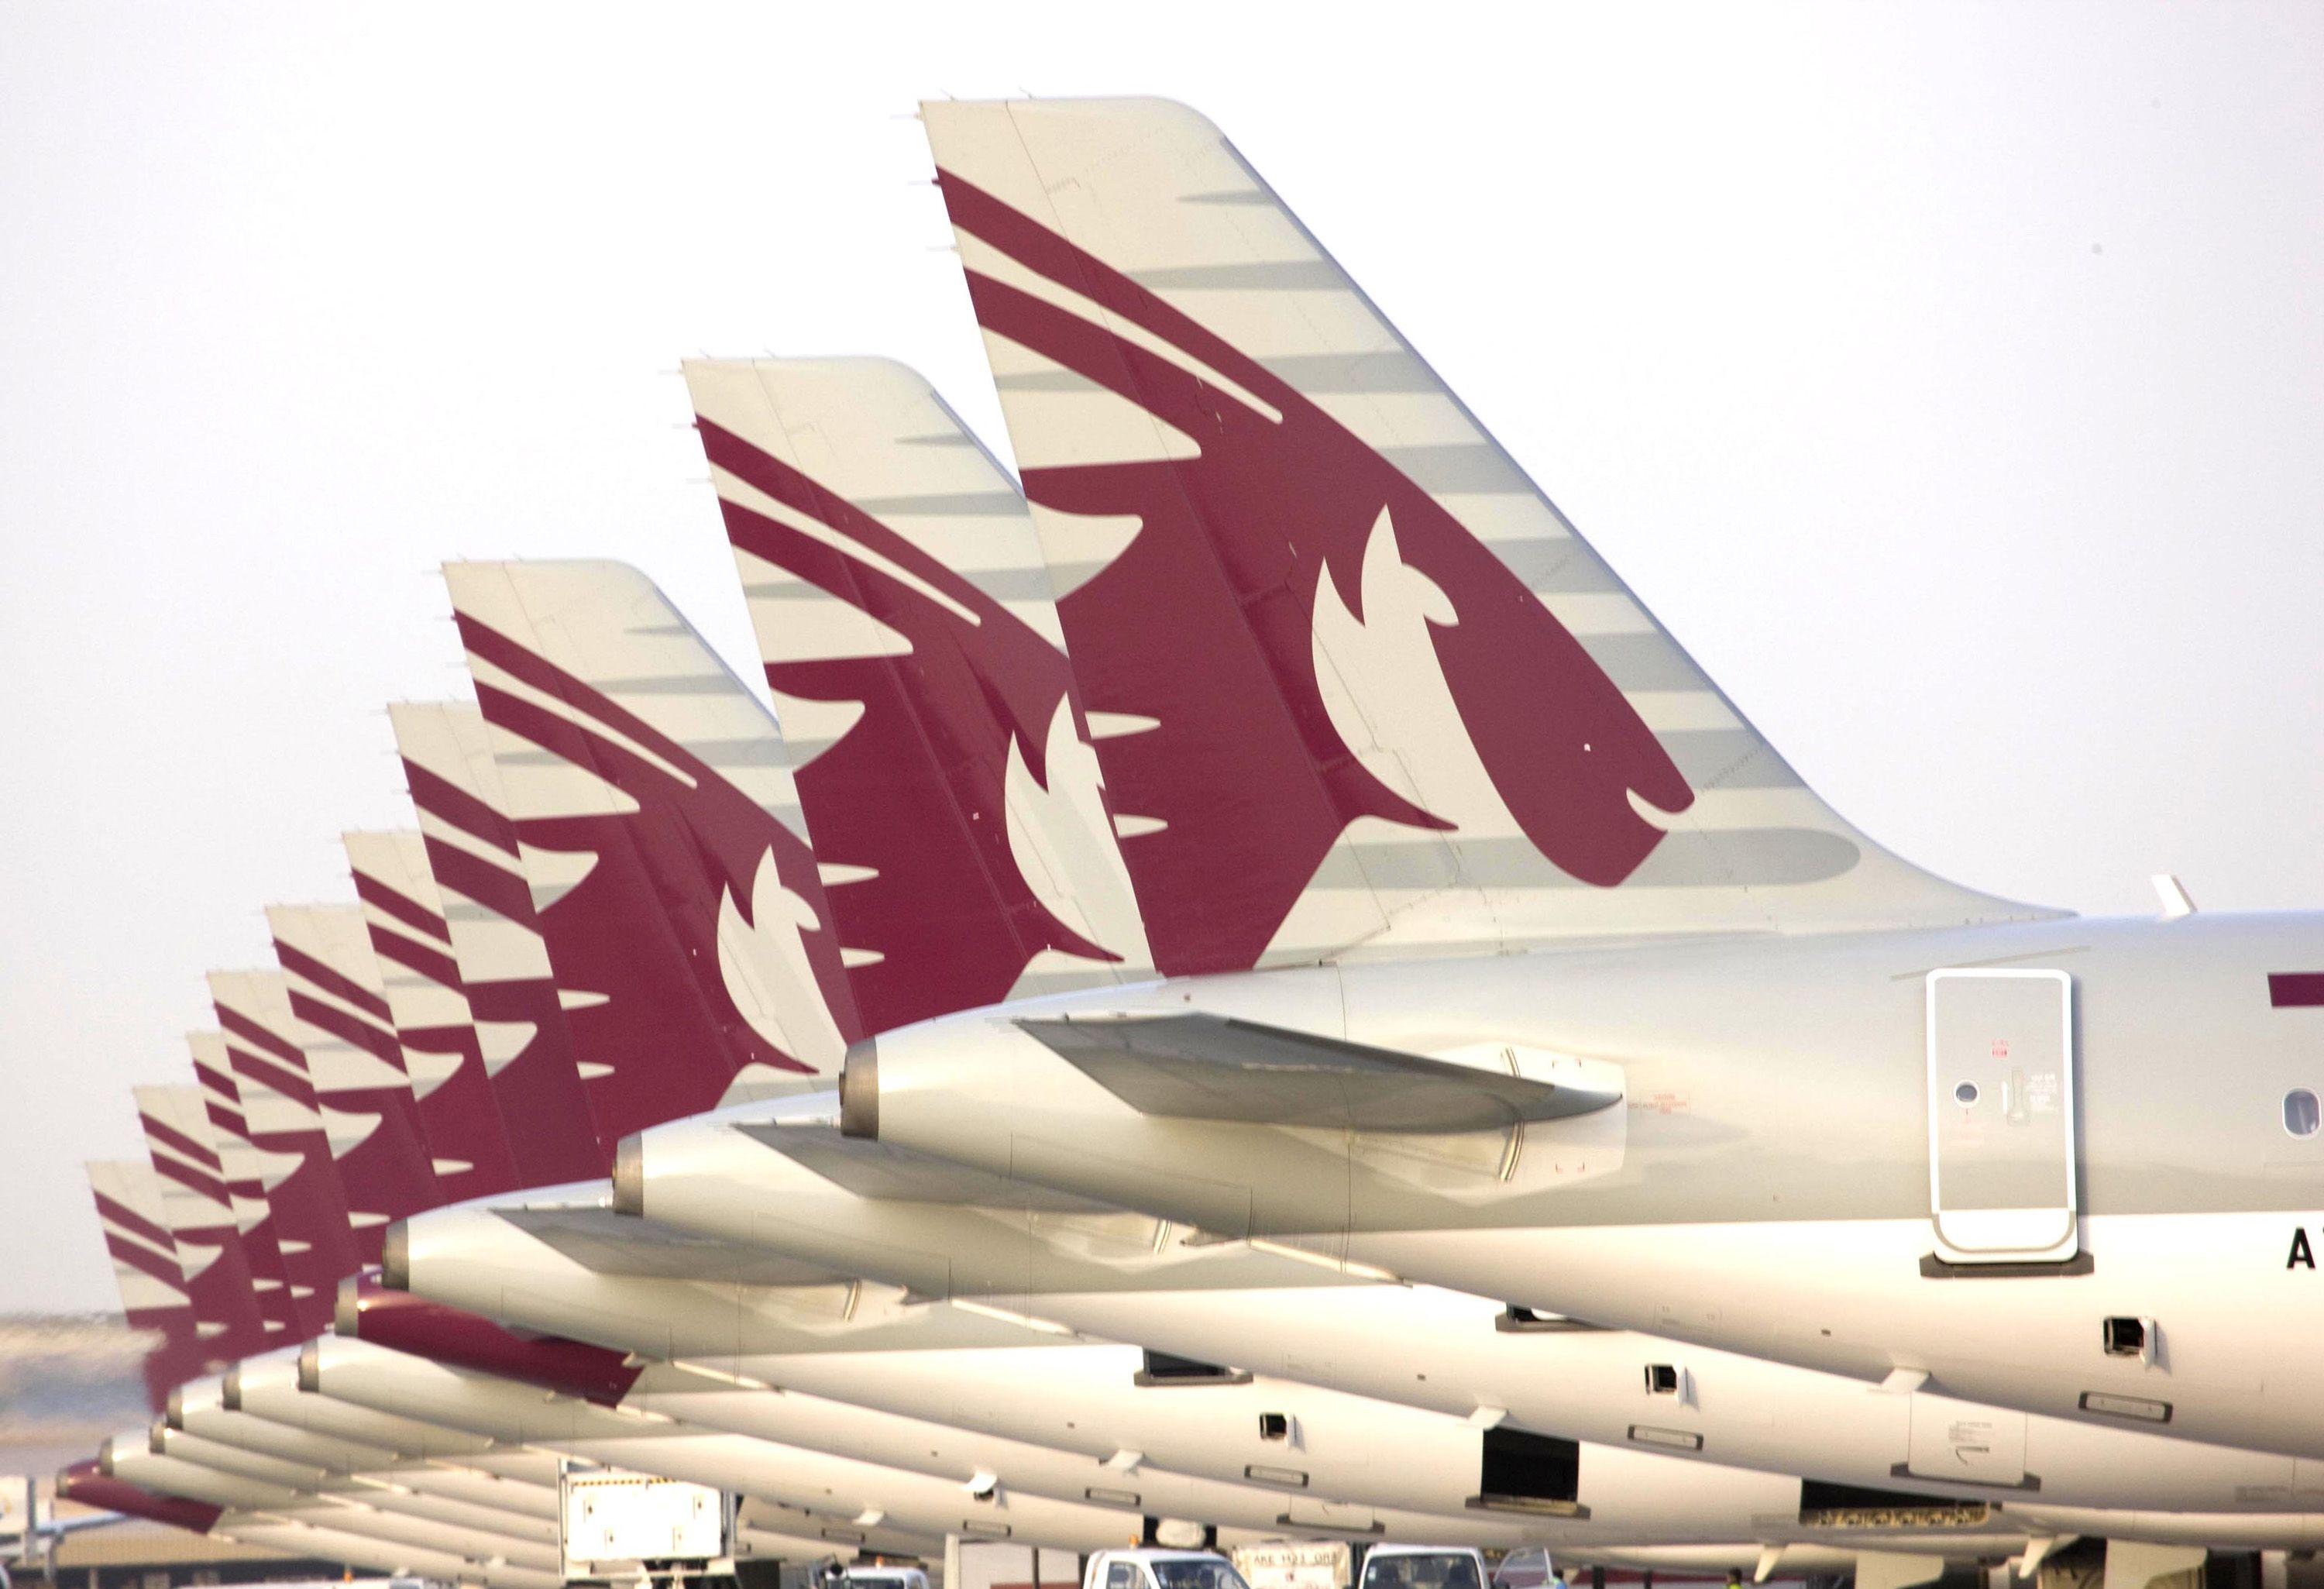 Airline with Goat Logo - Qatar Airways turning 20 hoping for a joint venture